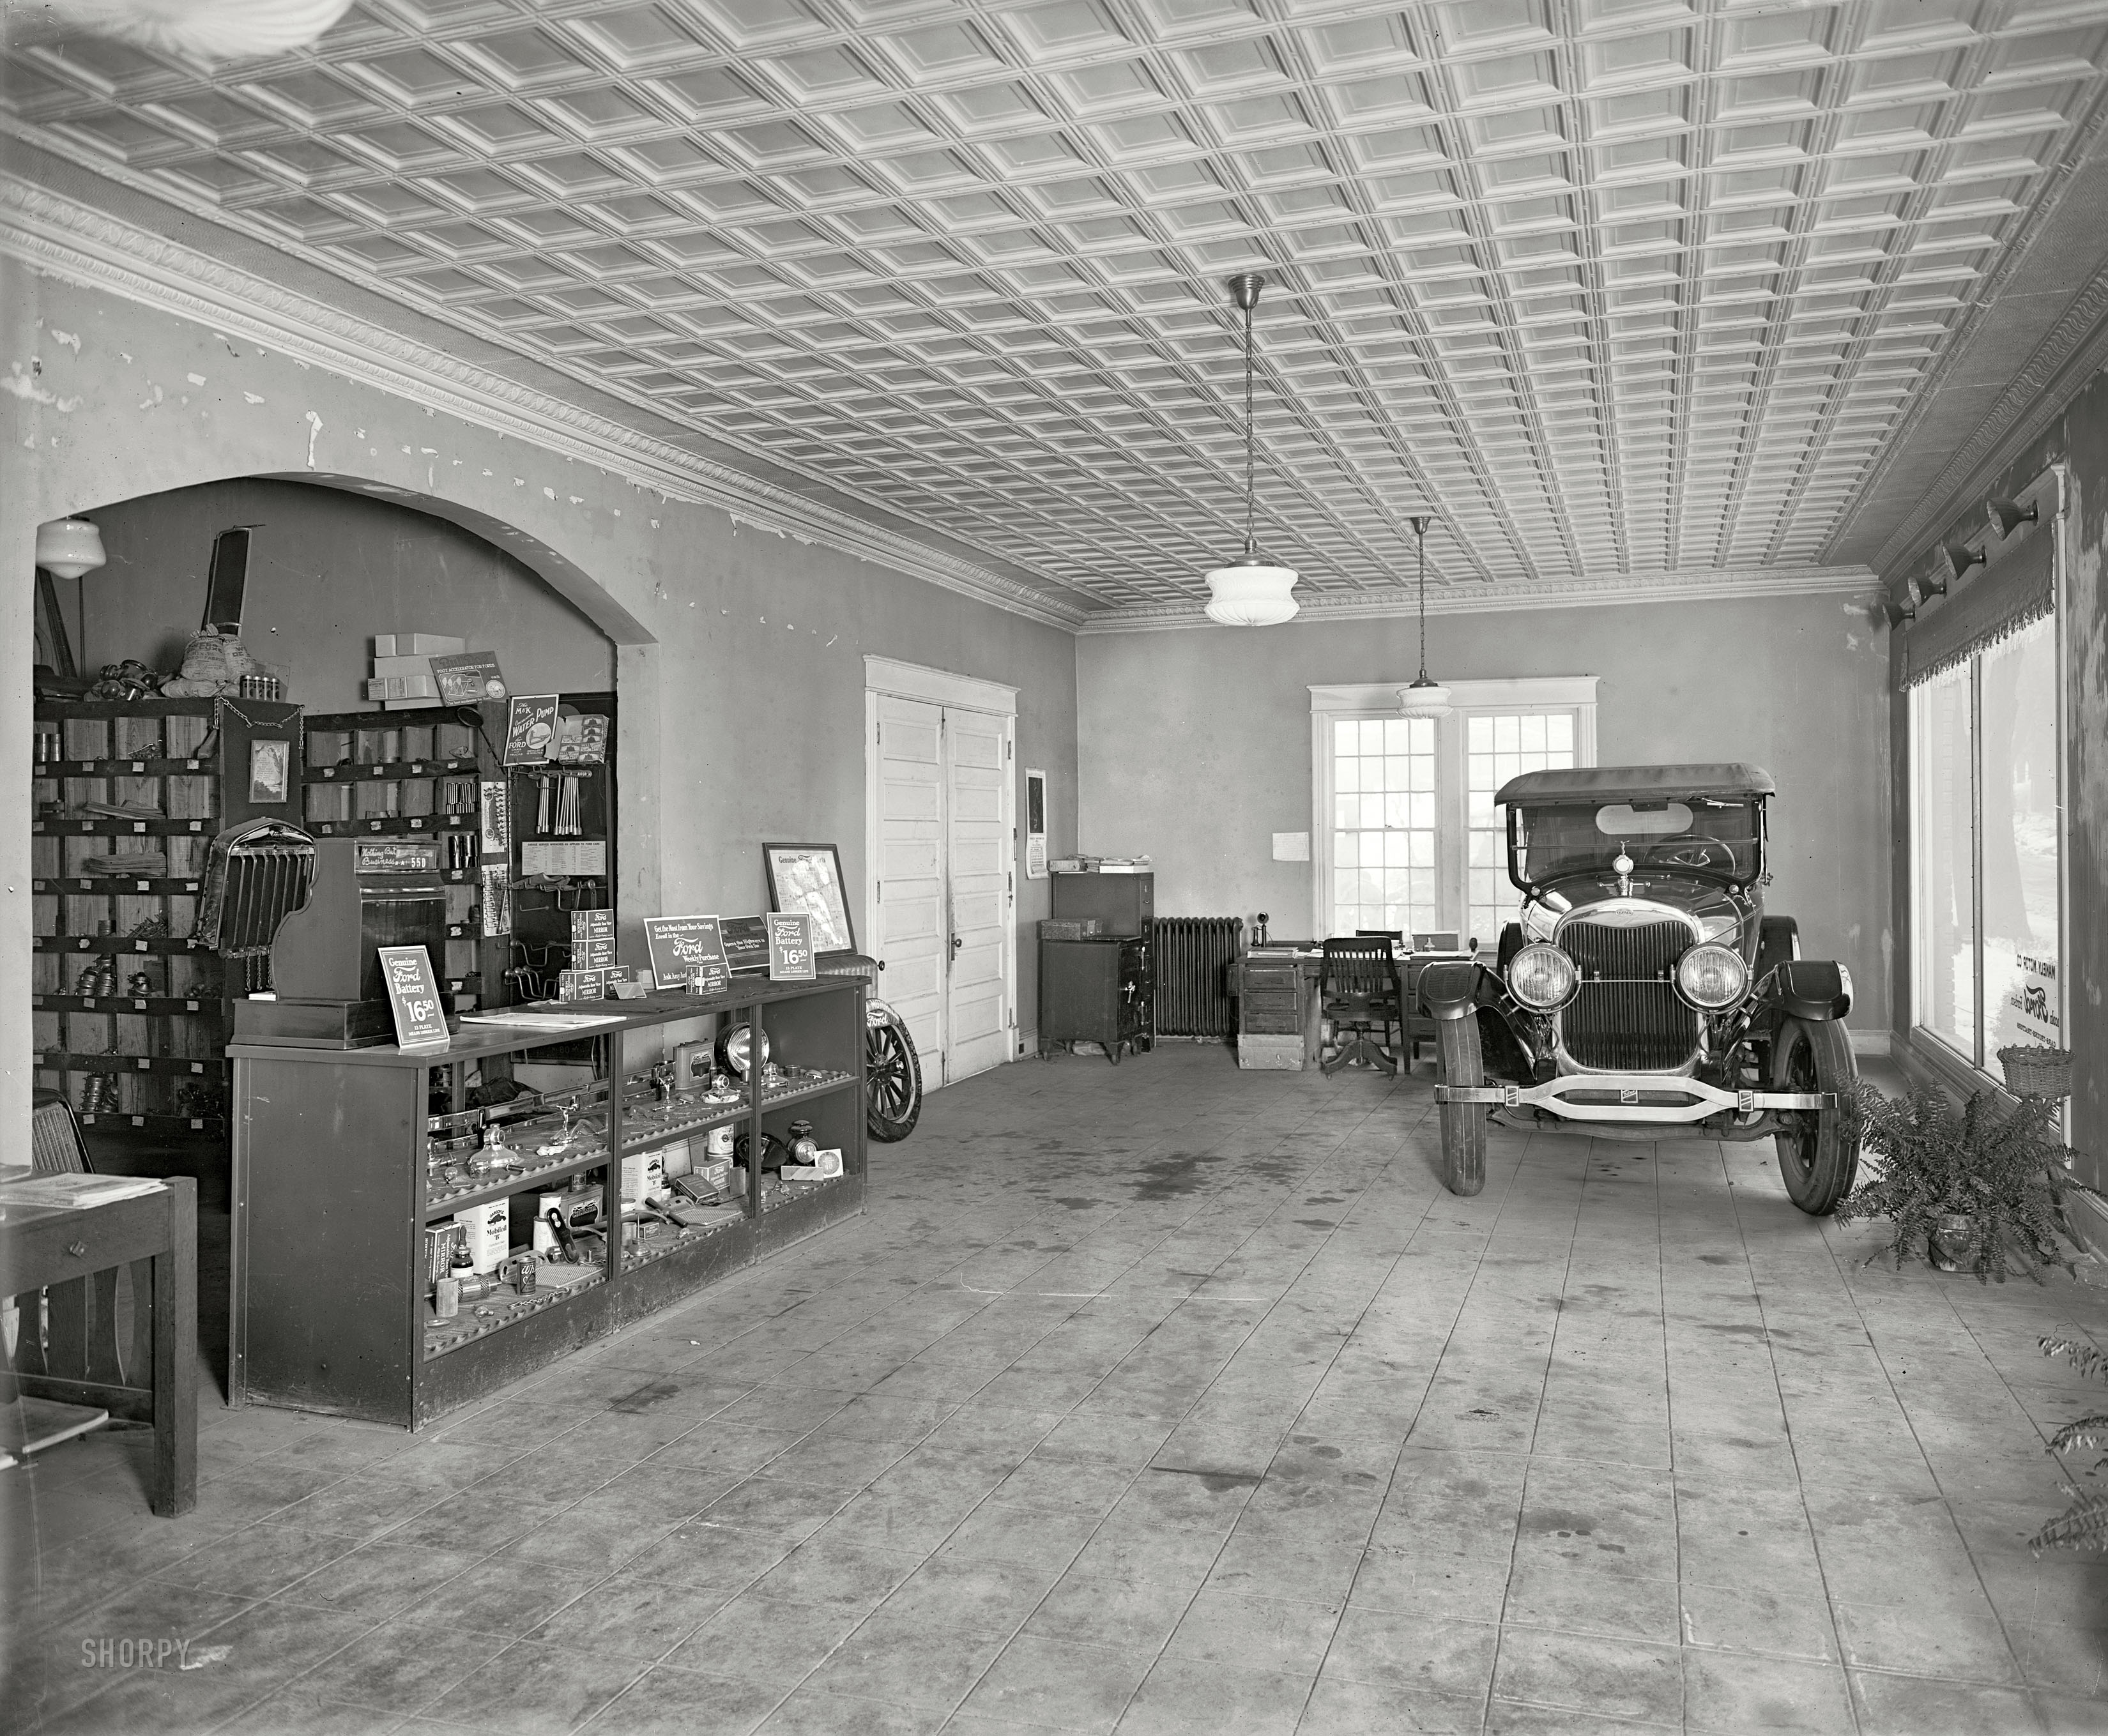 January 1925. Falls Church, Virginia. "Makely Motor Co." Home of this circa 1923 Lincoln. National Photo Company Collection glass negative. View full size.